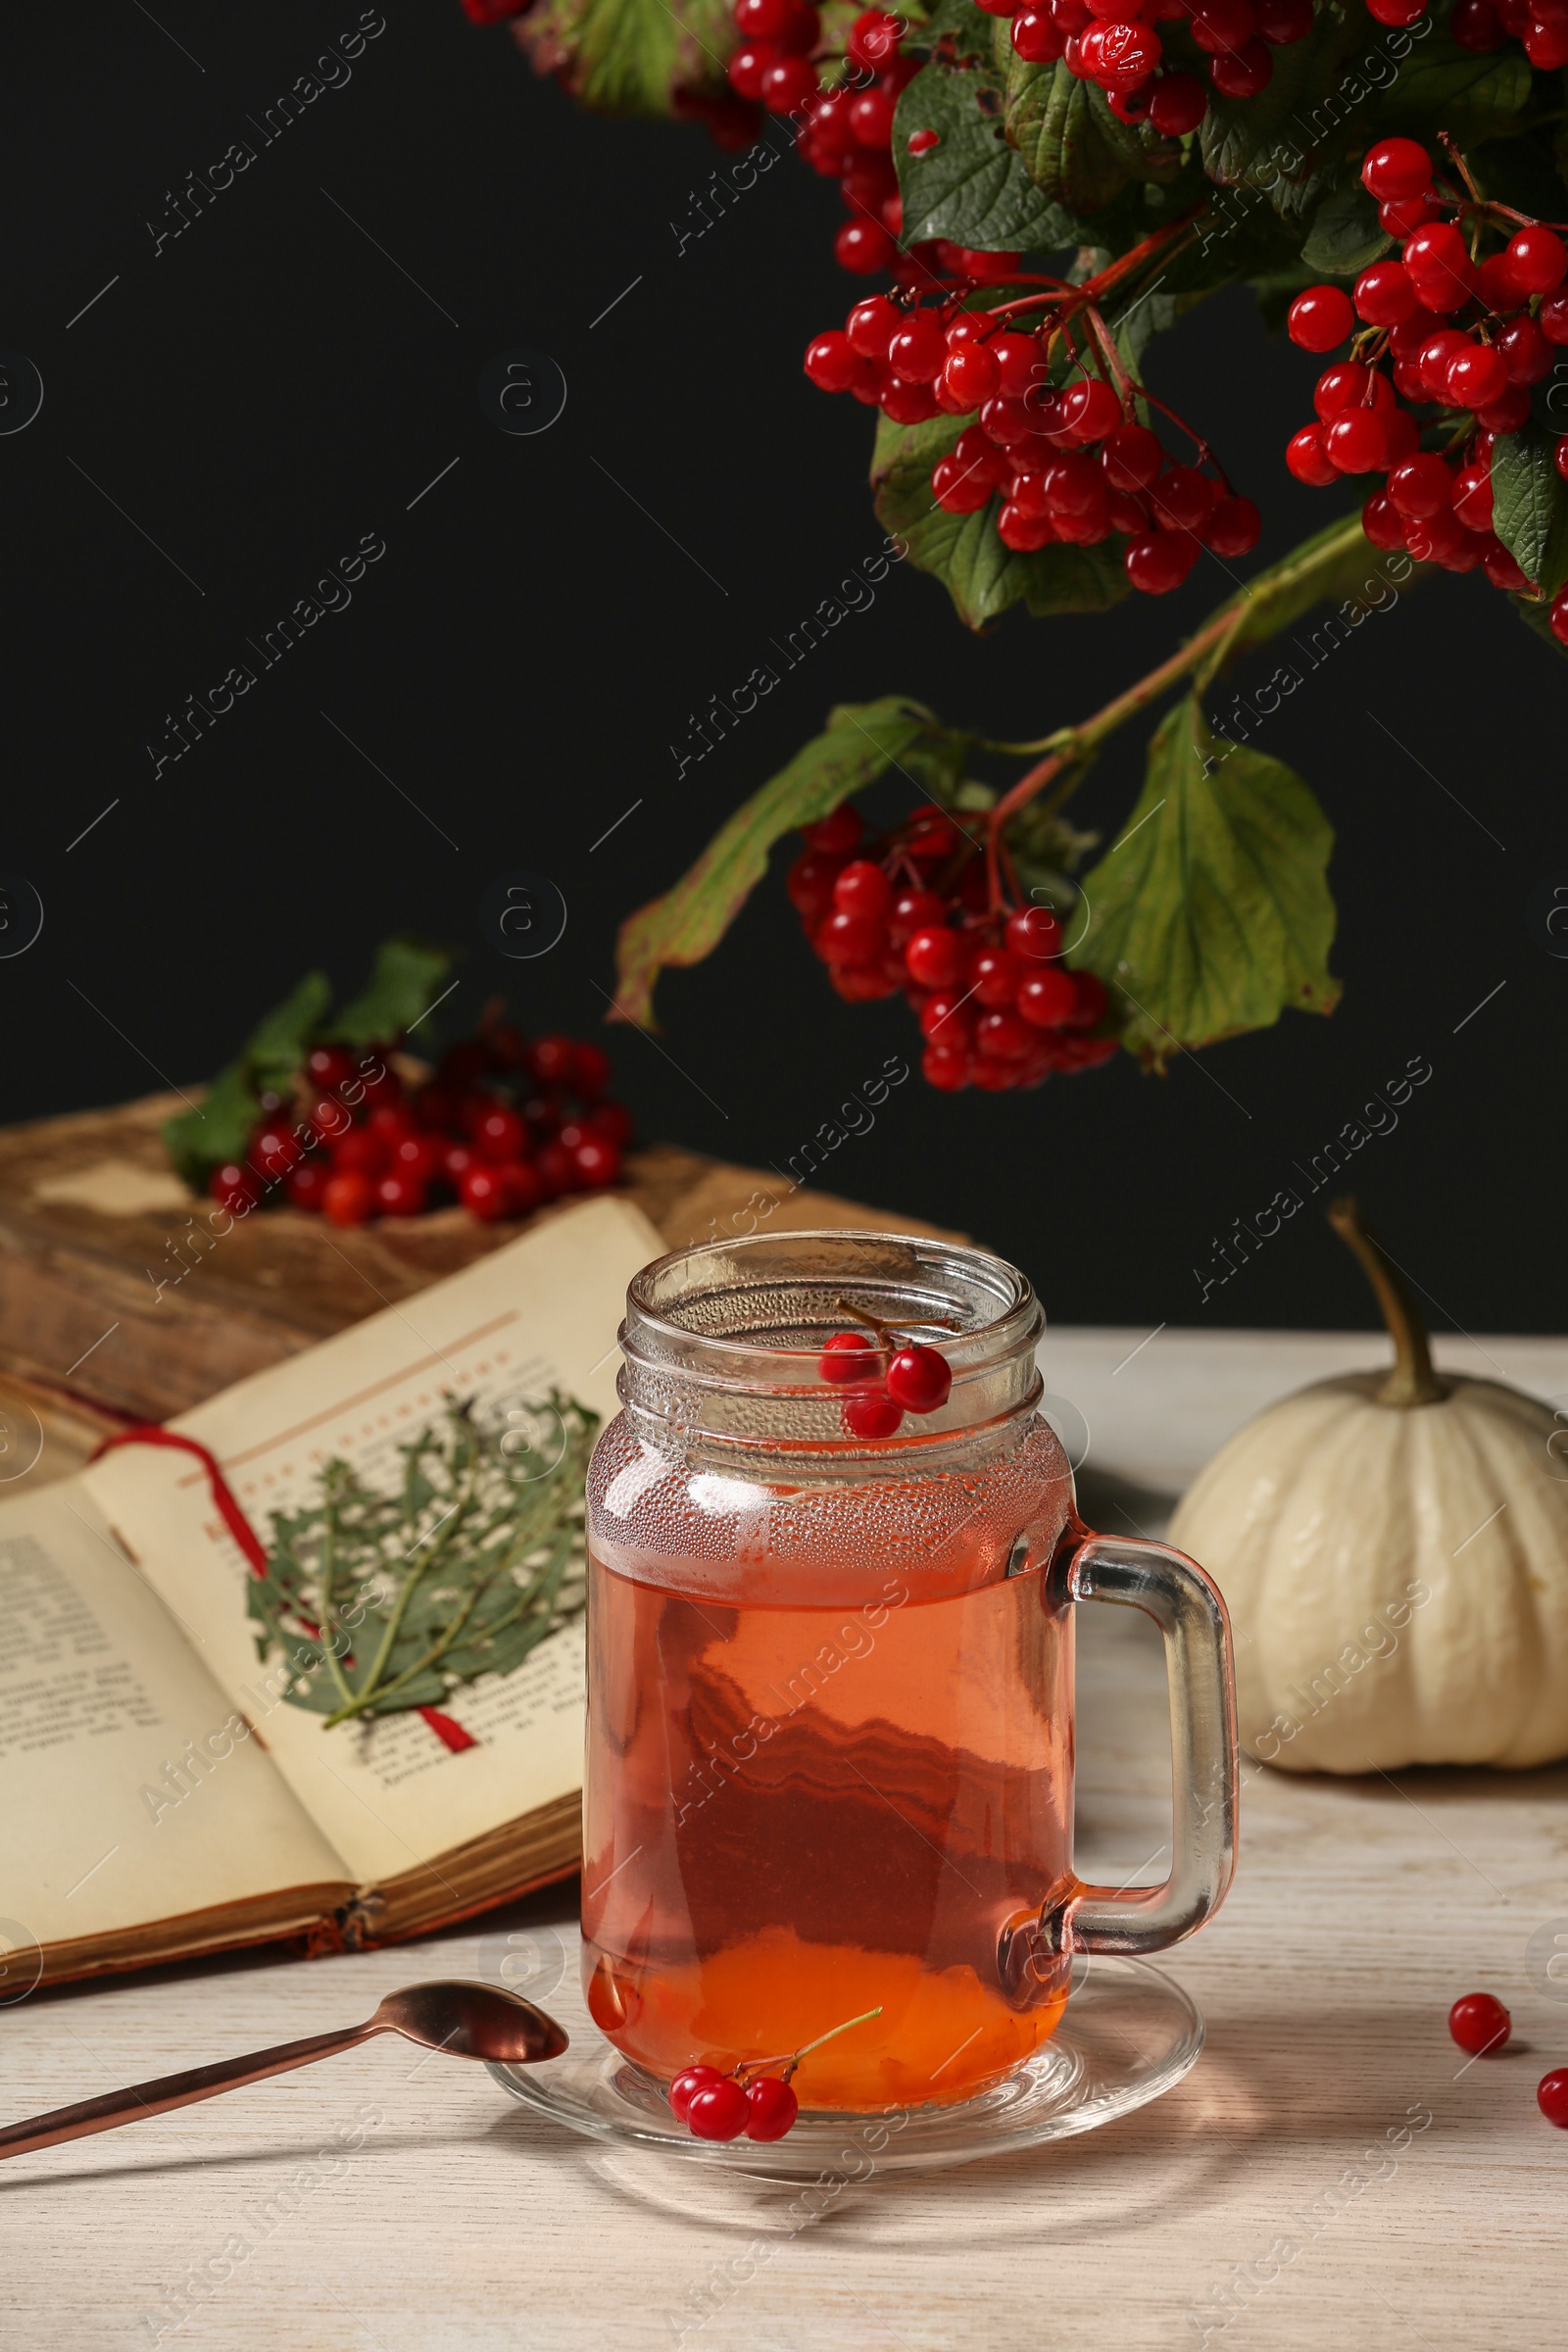 Photo of Delicious viburnum tea, book and pumpkin on wooden table against dark background. Cozy autumn atmosphere